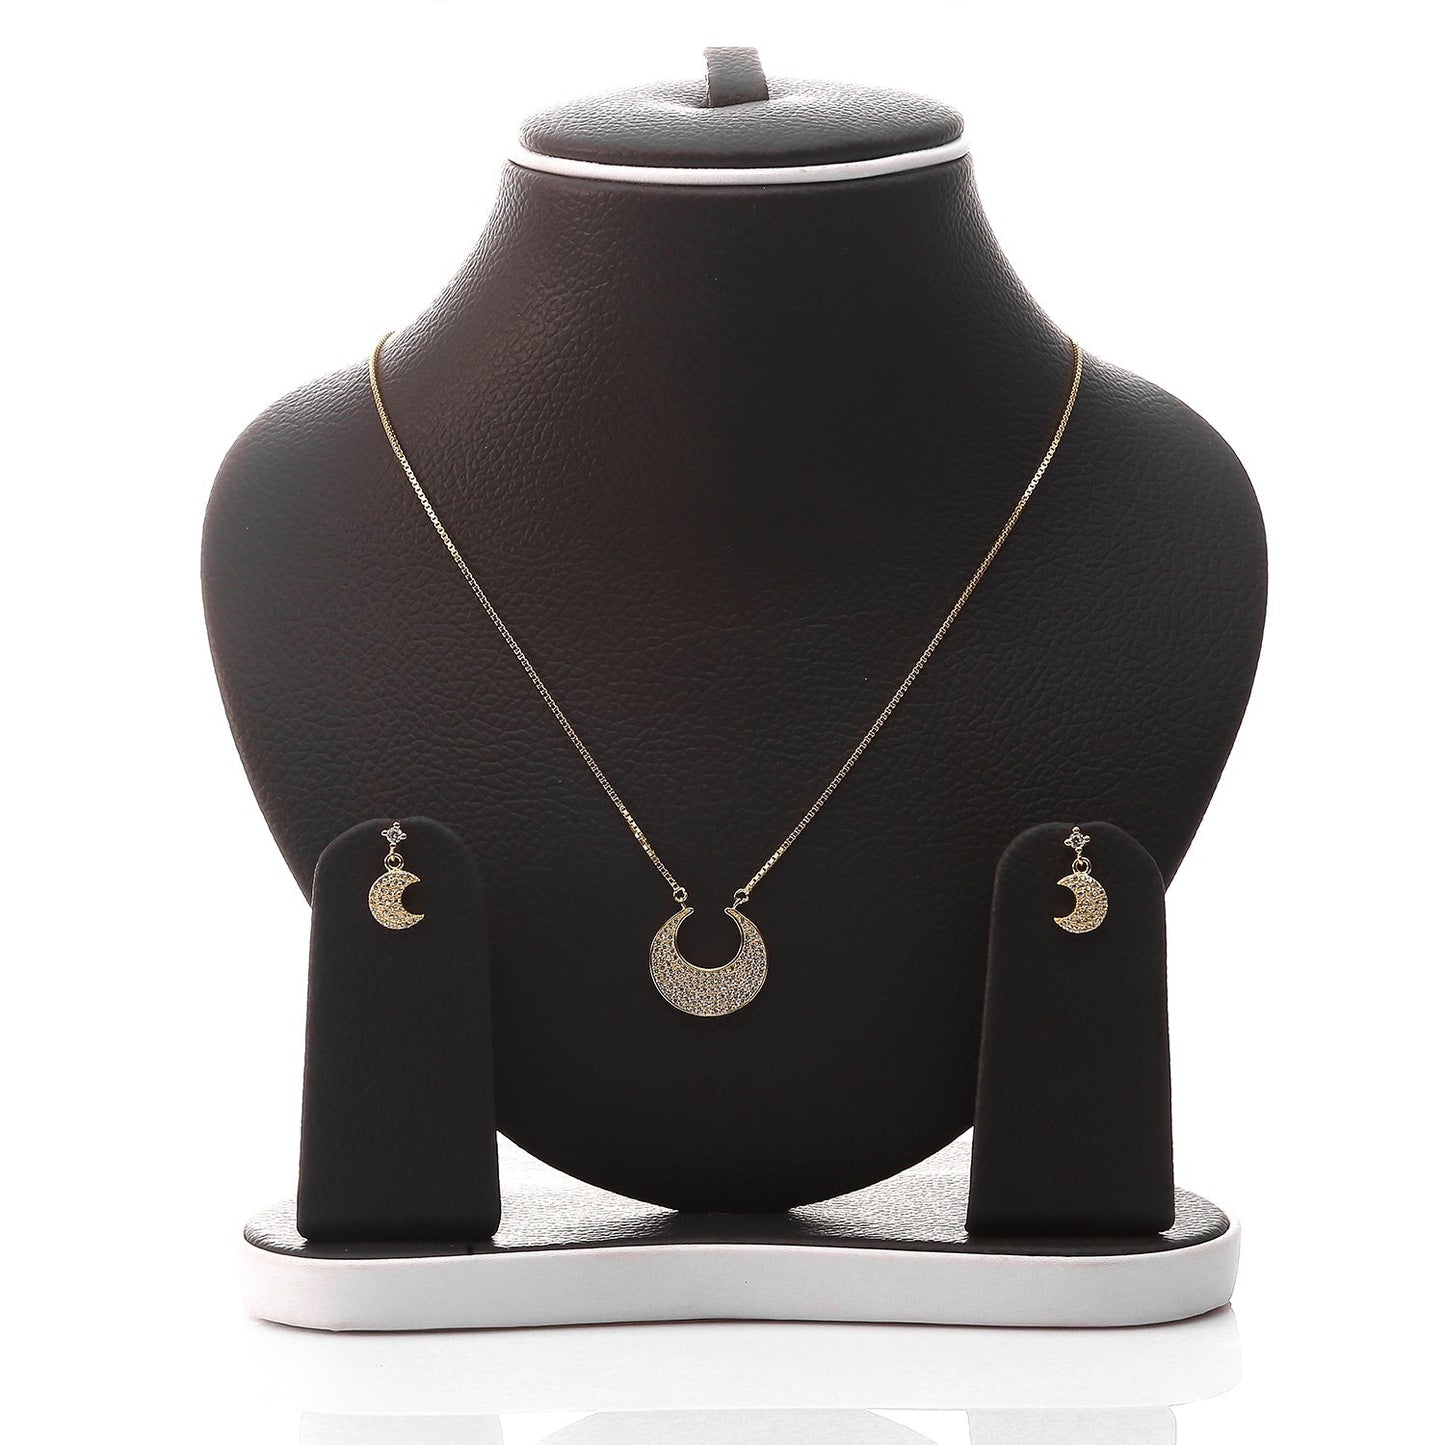 Crescent Moon Shaped Pendant Necklace and Earrings Set - ARJW1001GD ARCADIO